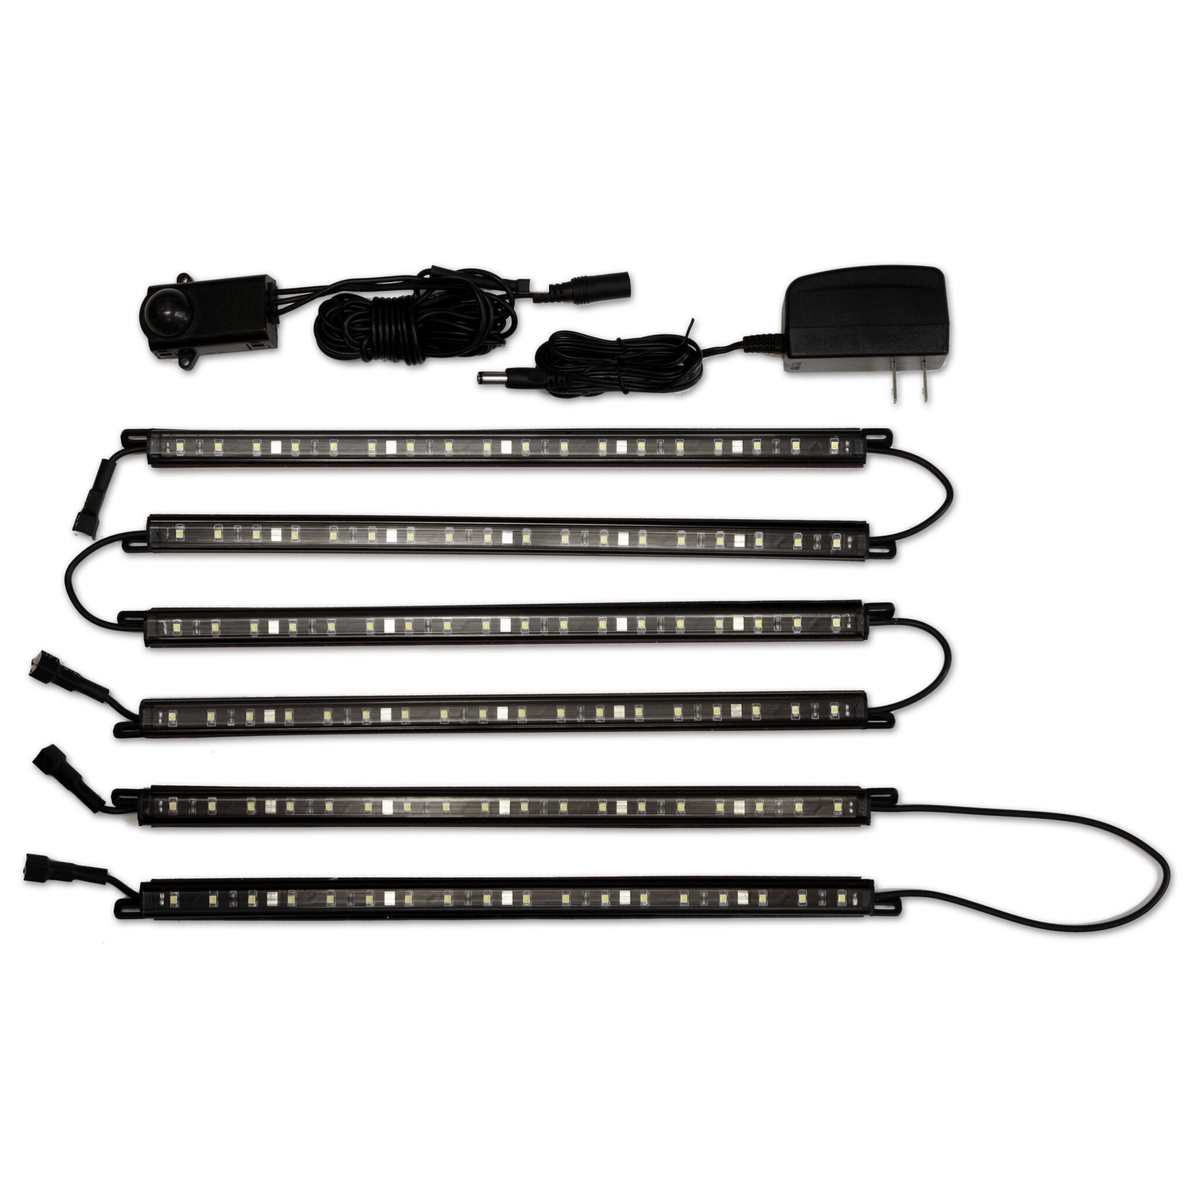 Accessory - Lights - Clearview Safe Light Kit - (6 wand lights)